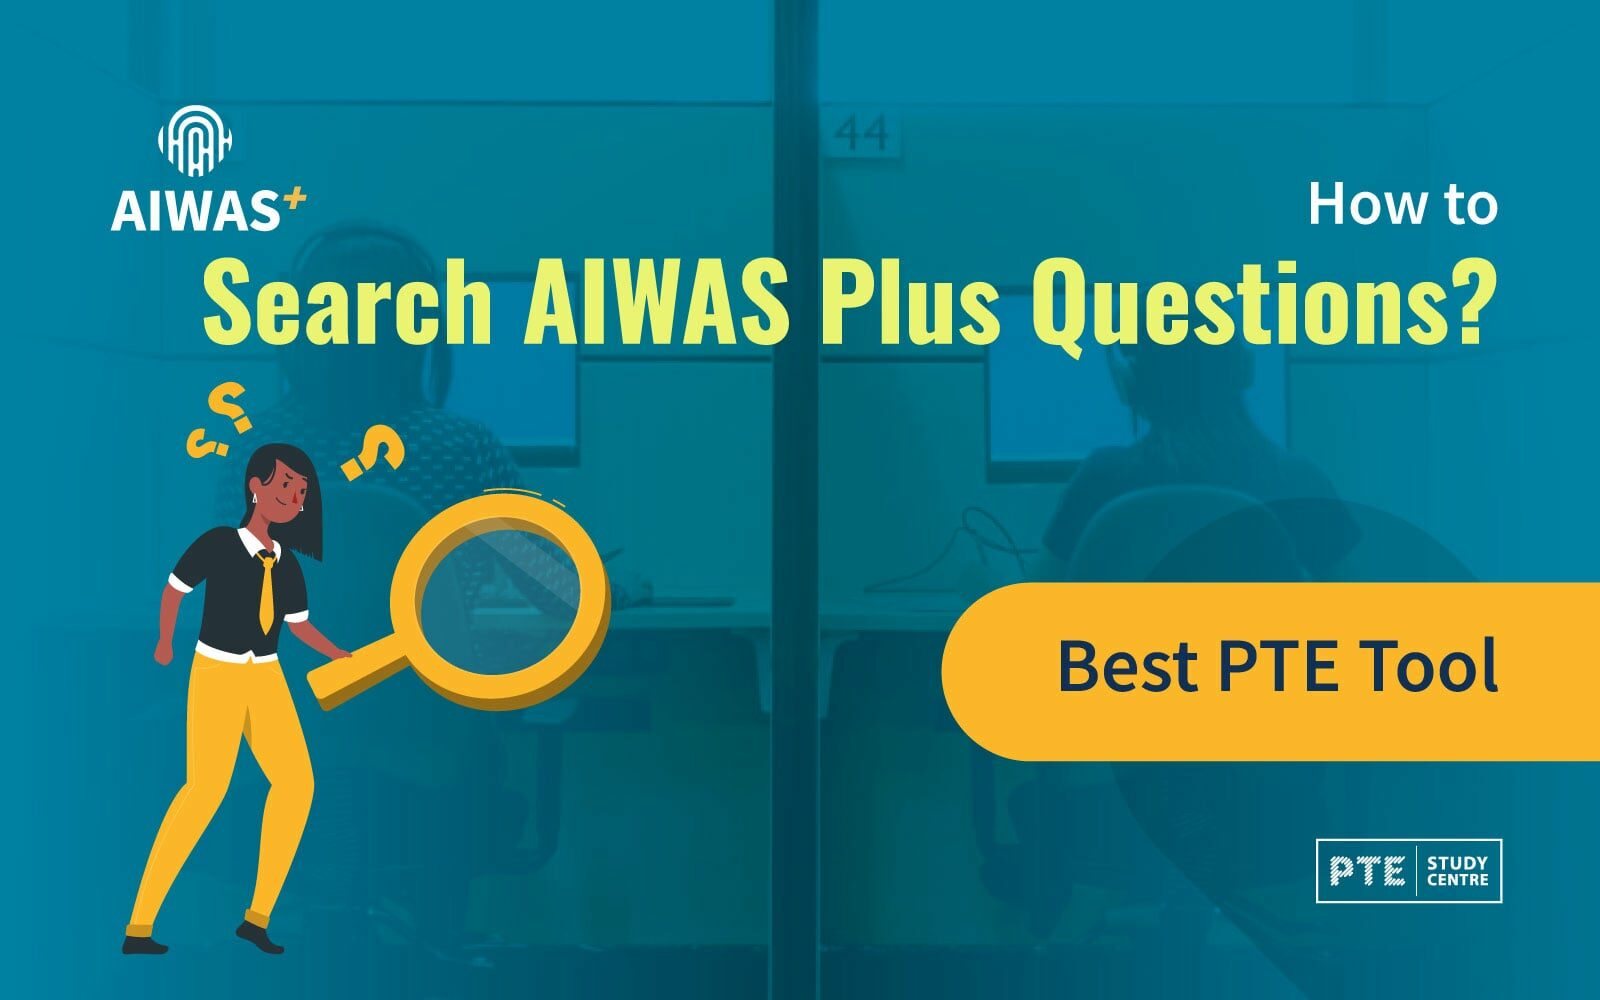 How to Search AIWAS Plus Questions?